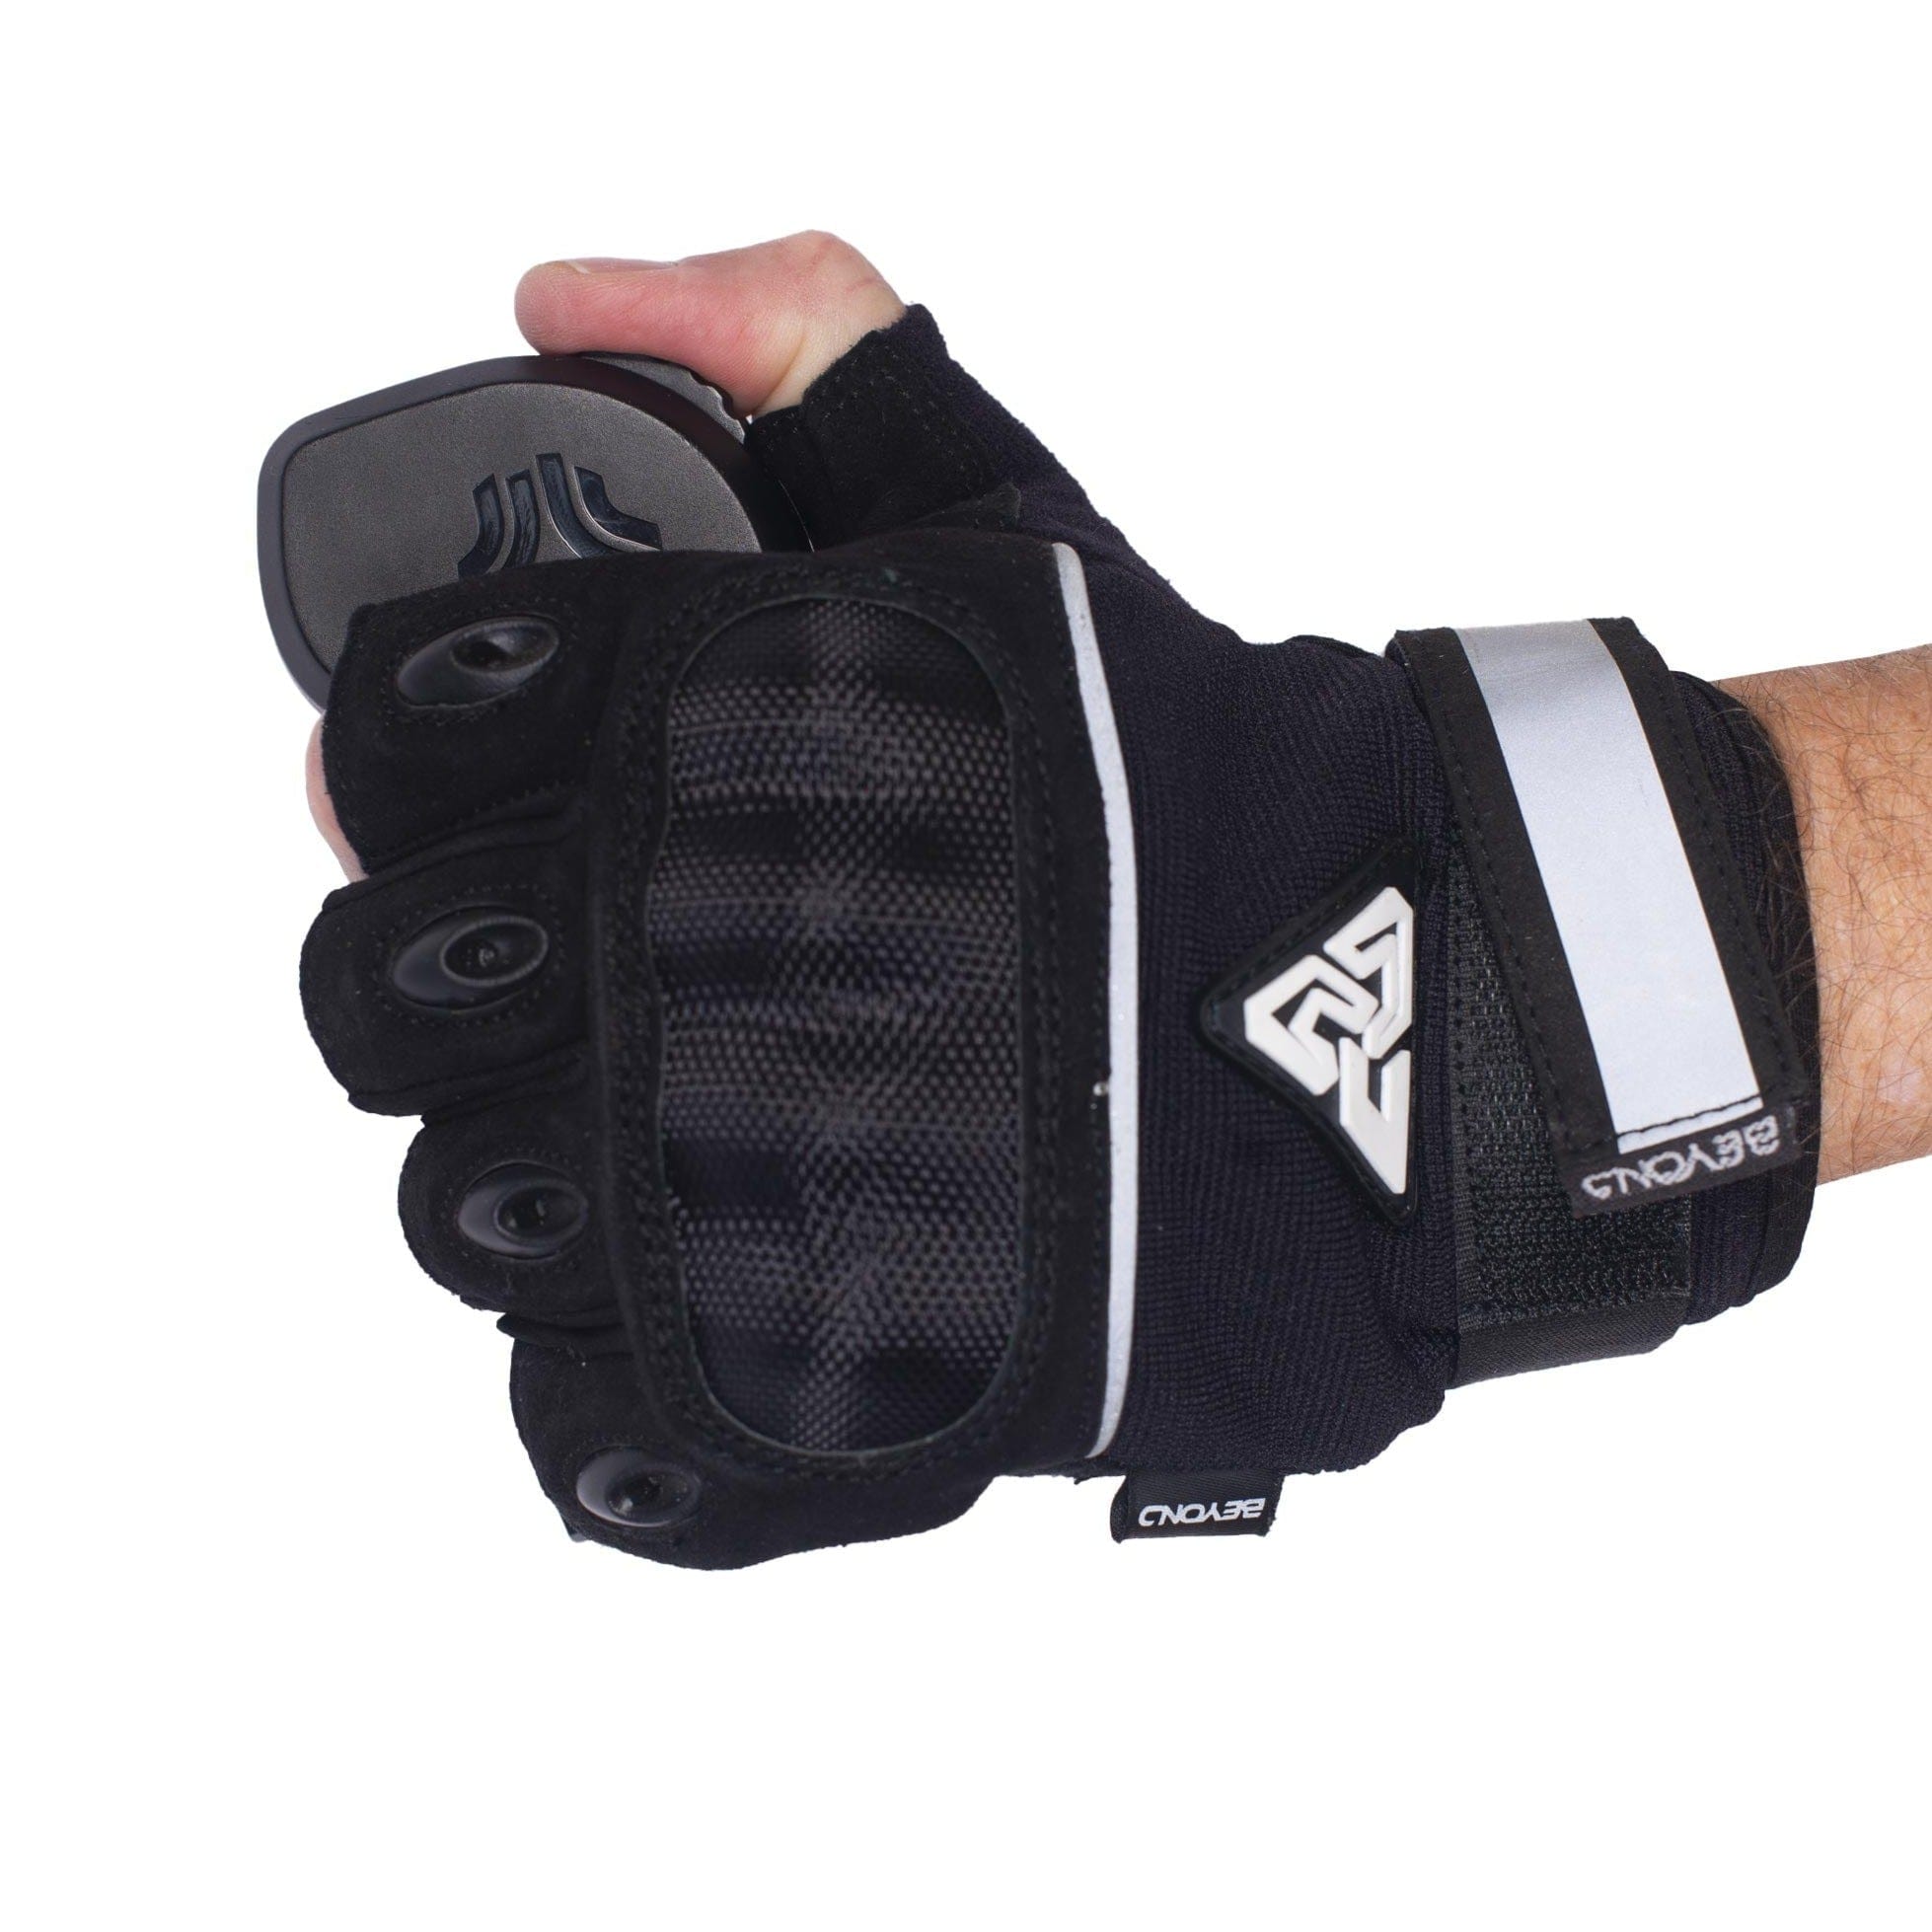 hand-in-black-protective-glove